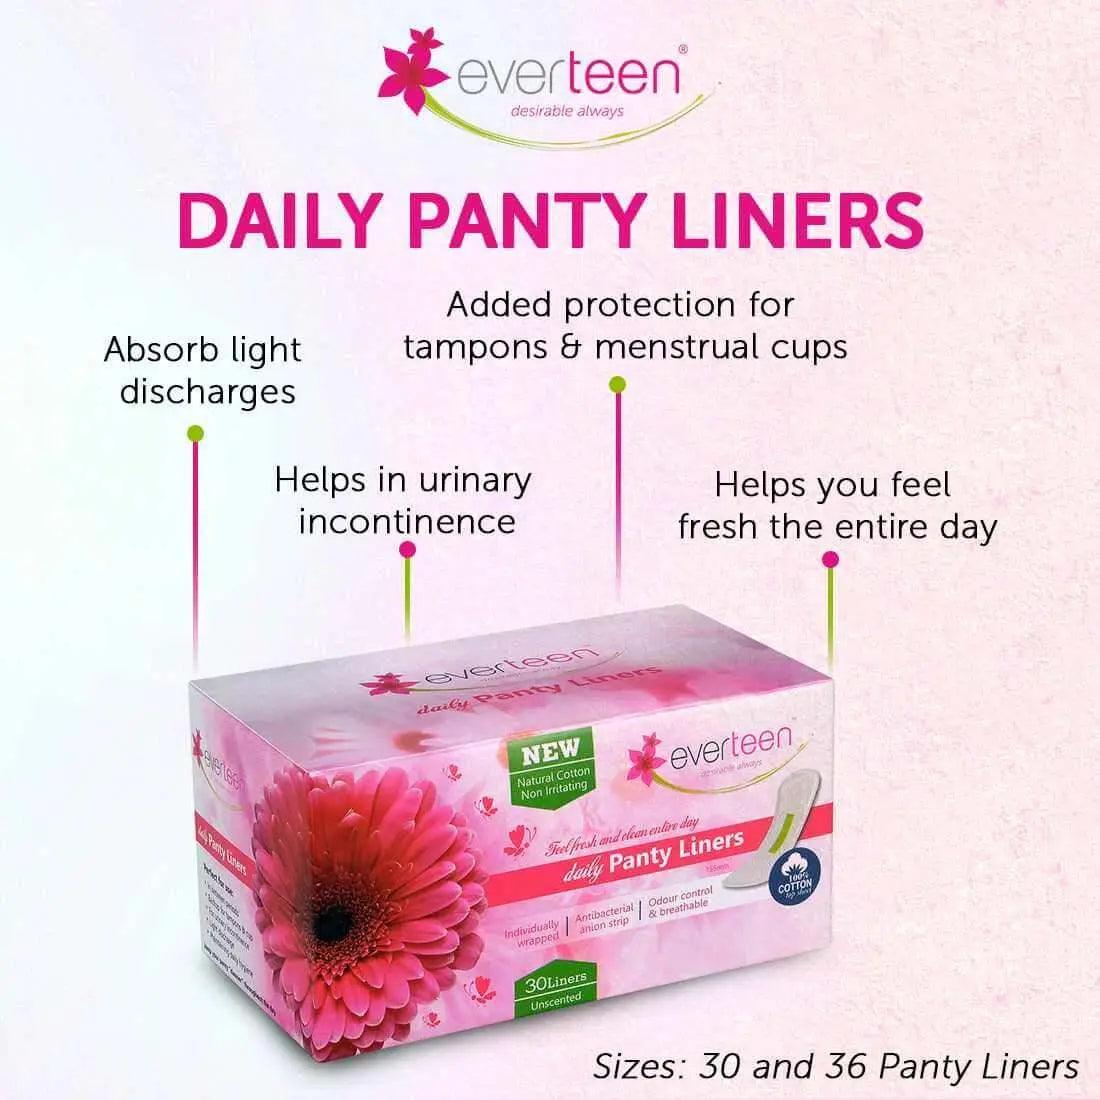 everteen Natural Cotton Daily Panty Liners for Women